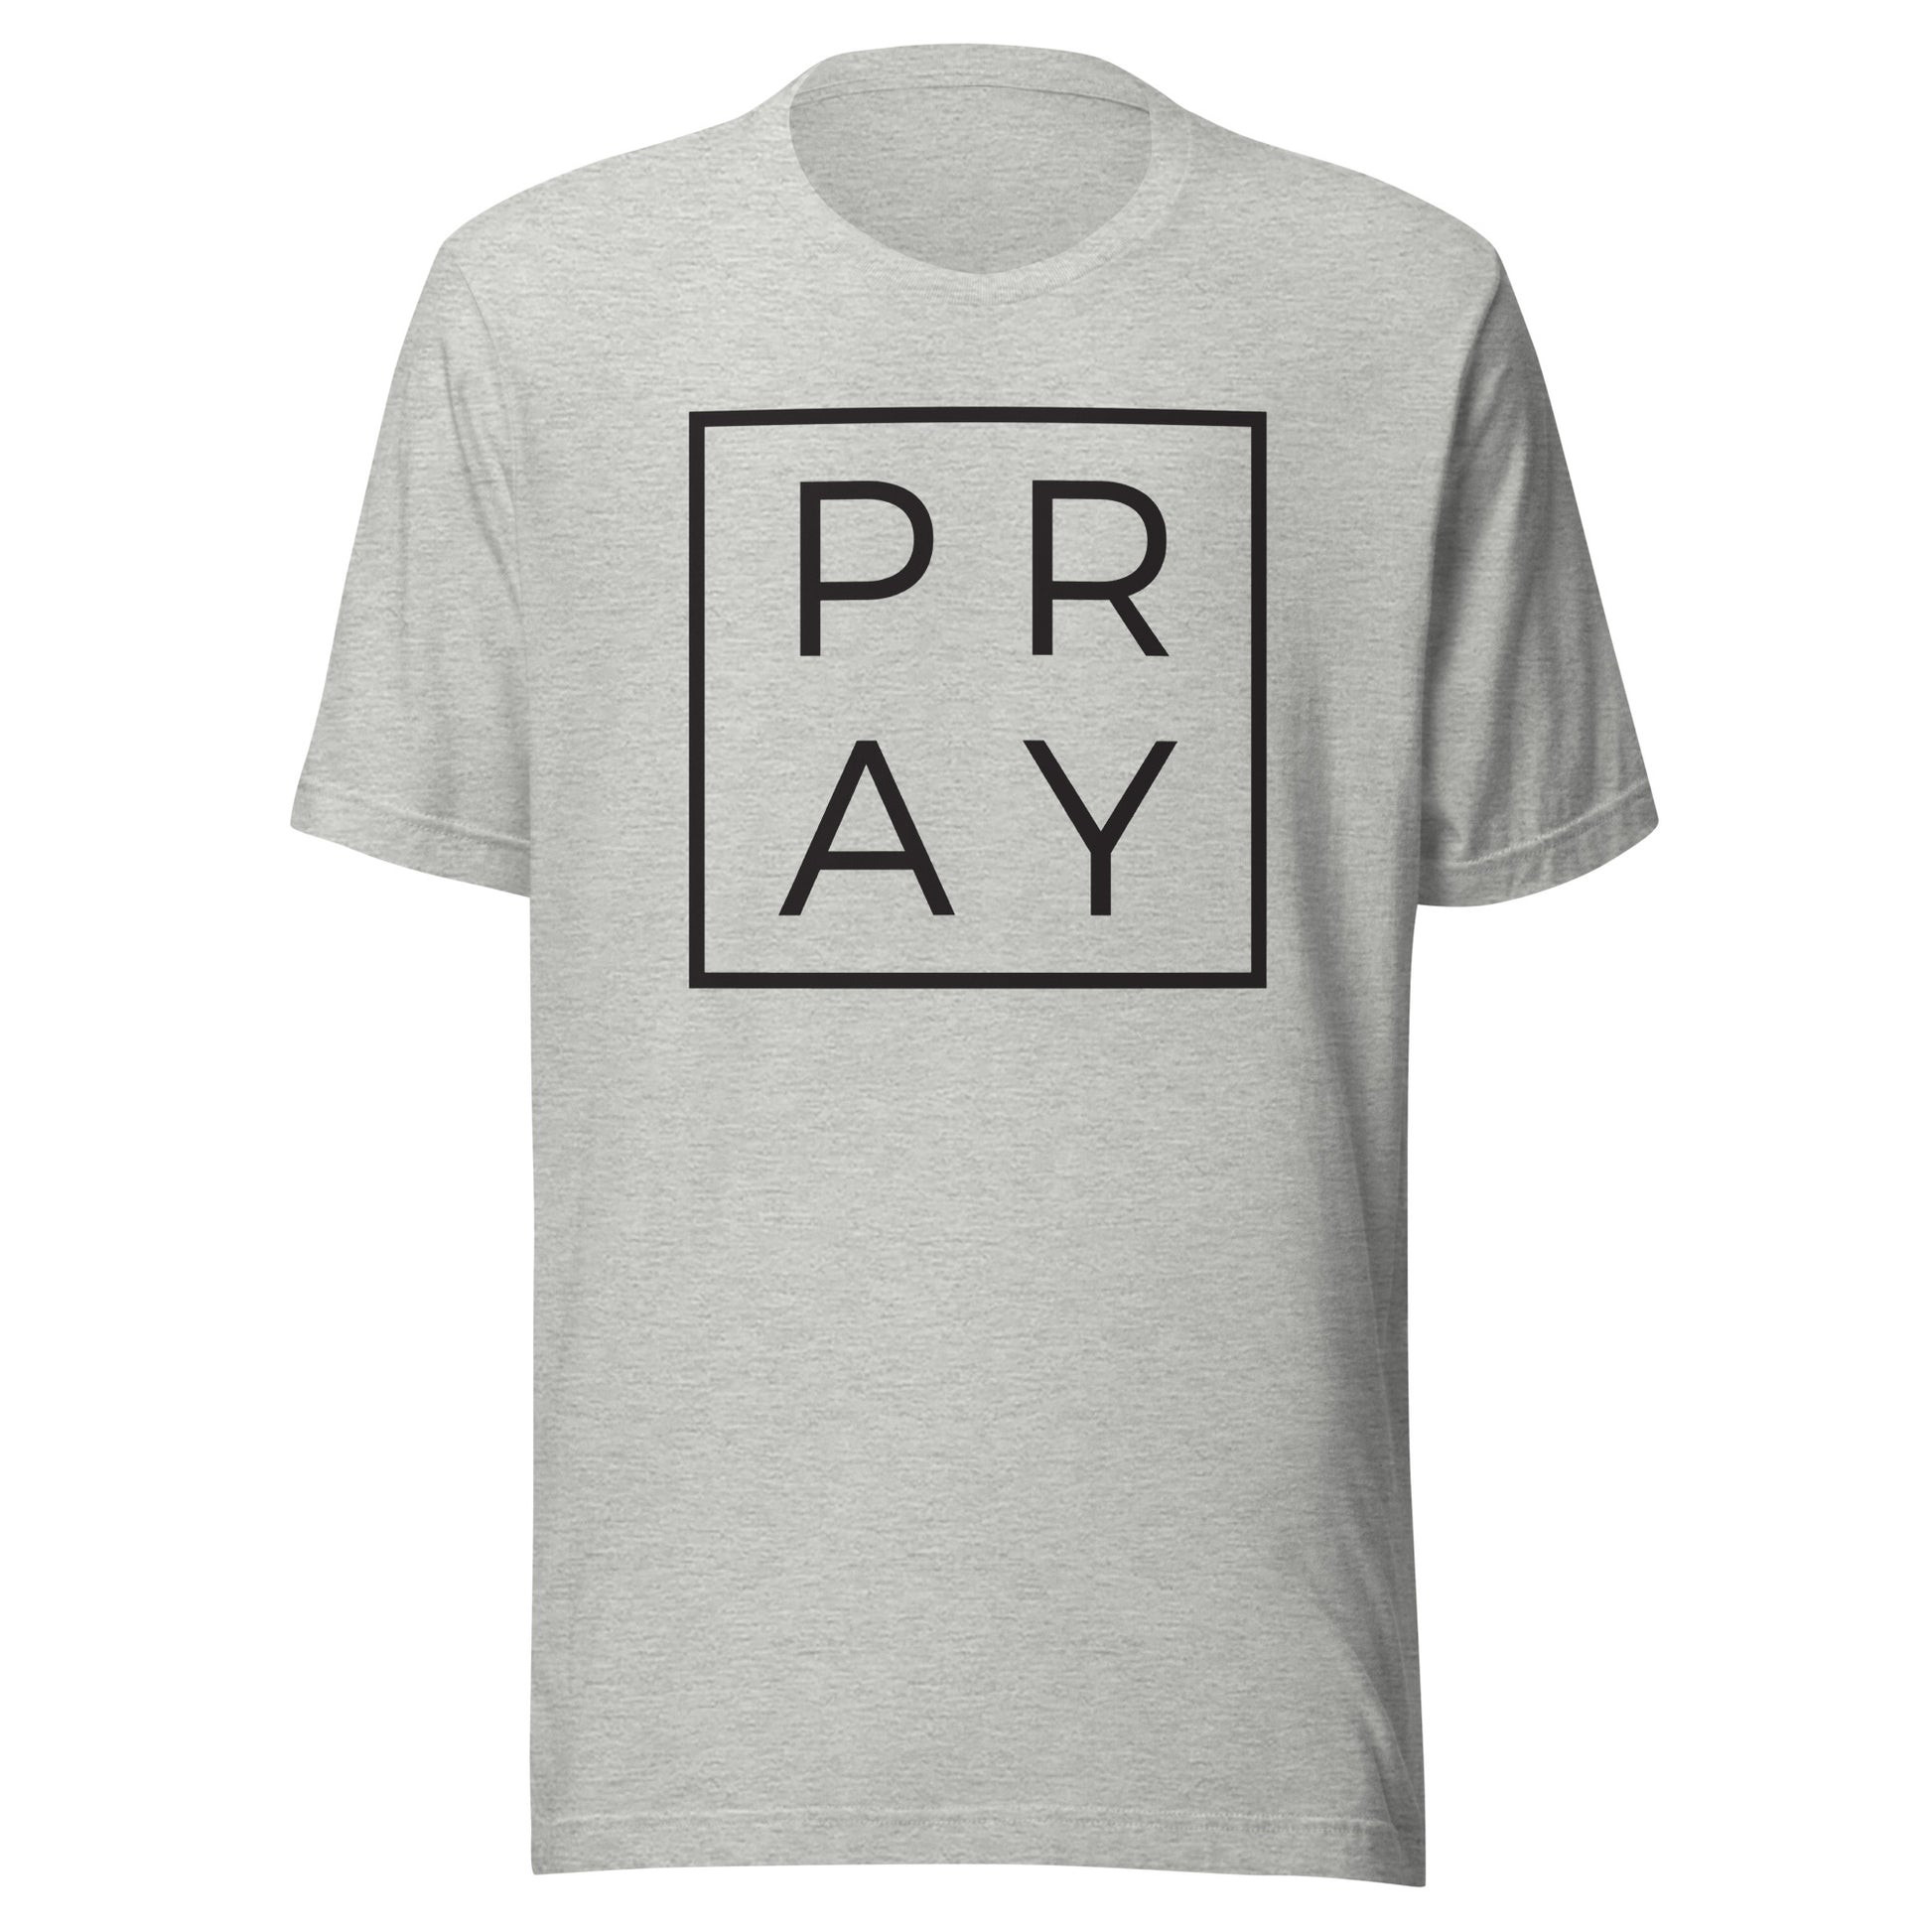 "Pray" T-shirt by Bella Canvas: Embrace Solace and Conversation in Faith